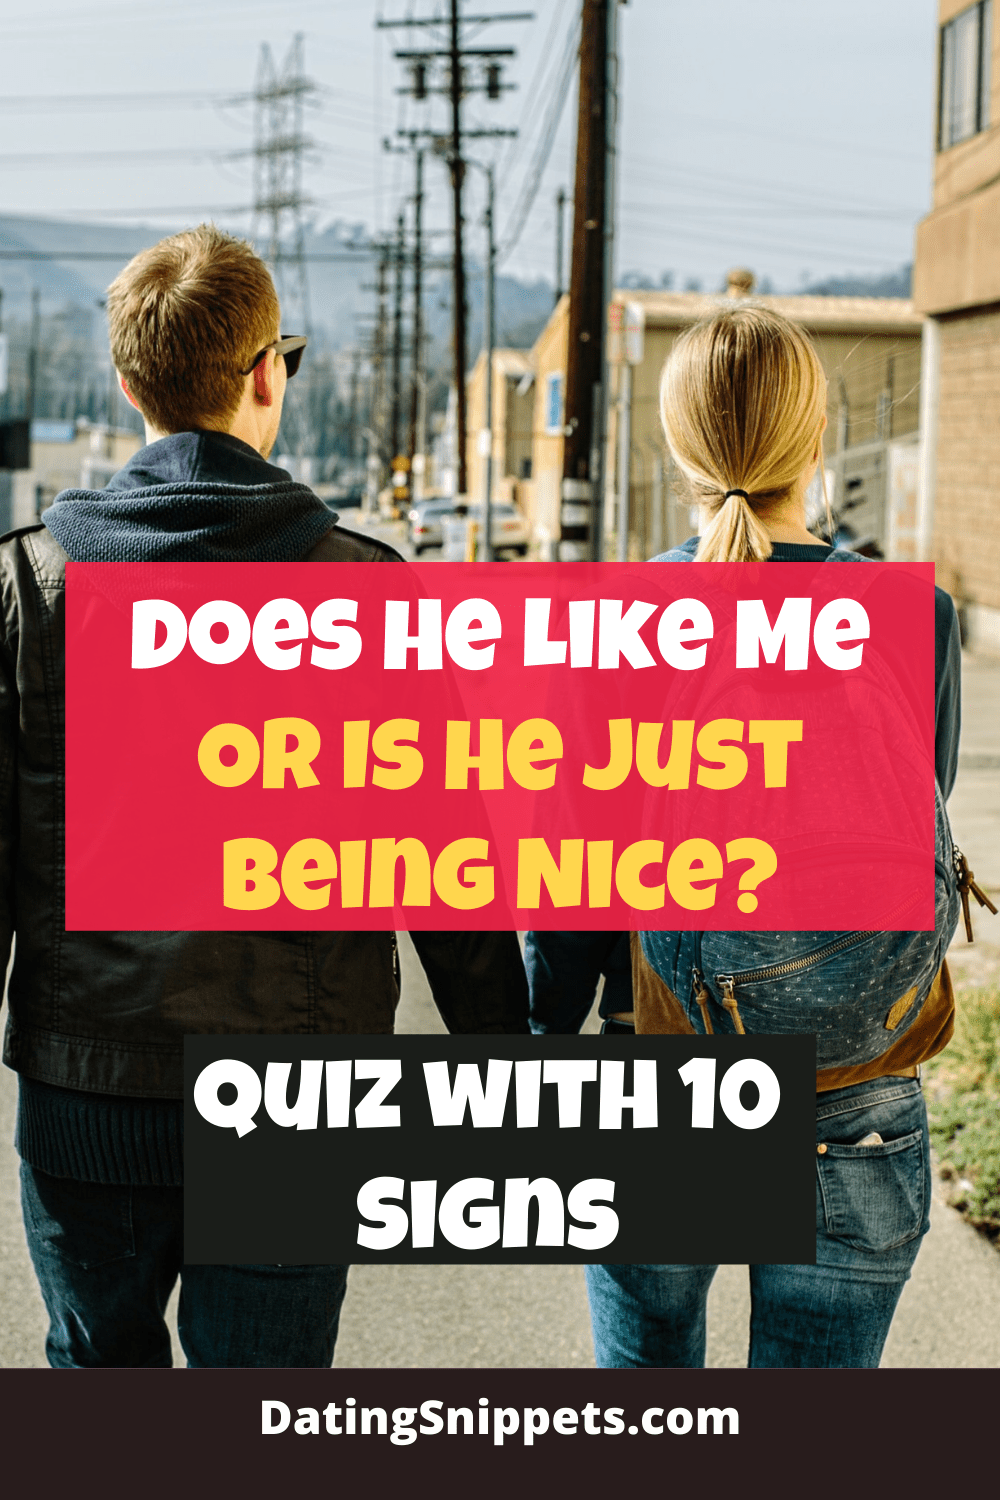 Does He Like Me or Is He Just Being Nice? By Dating Snippets